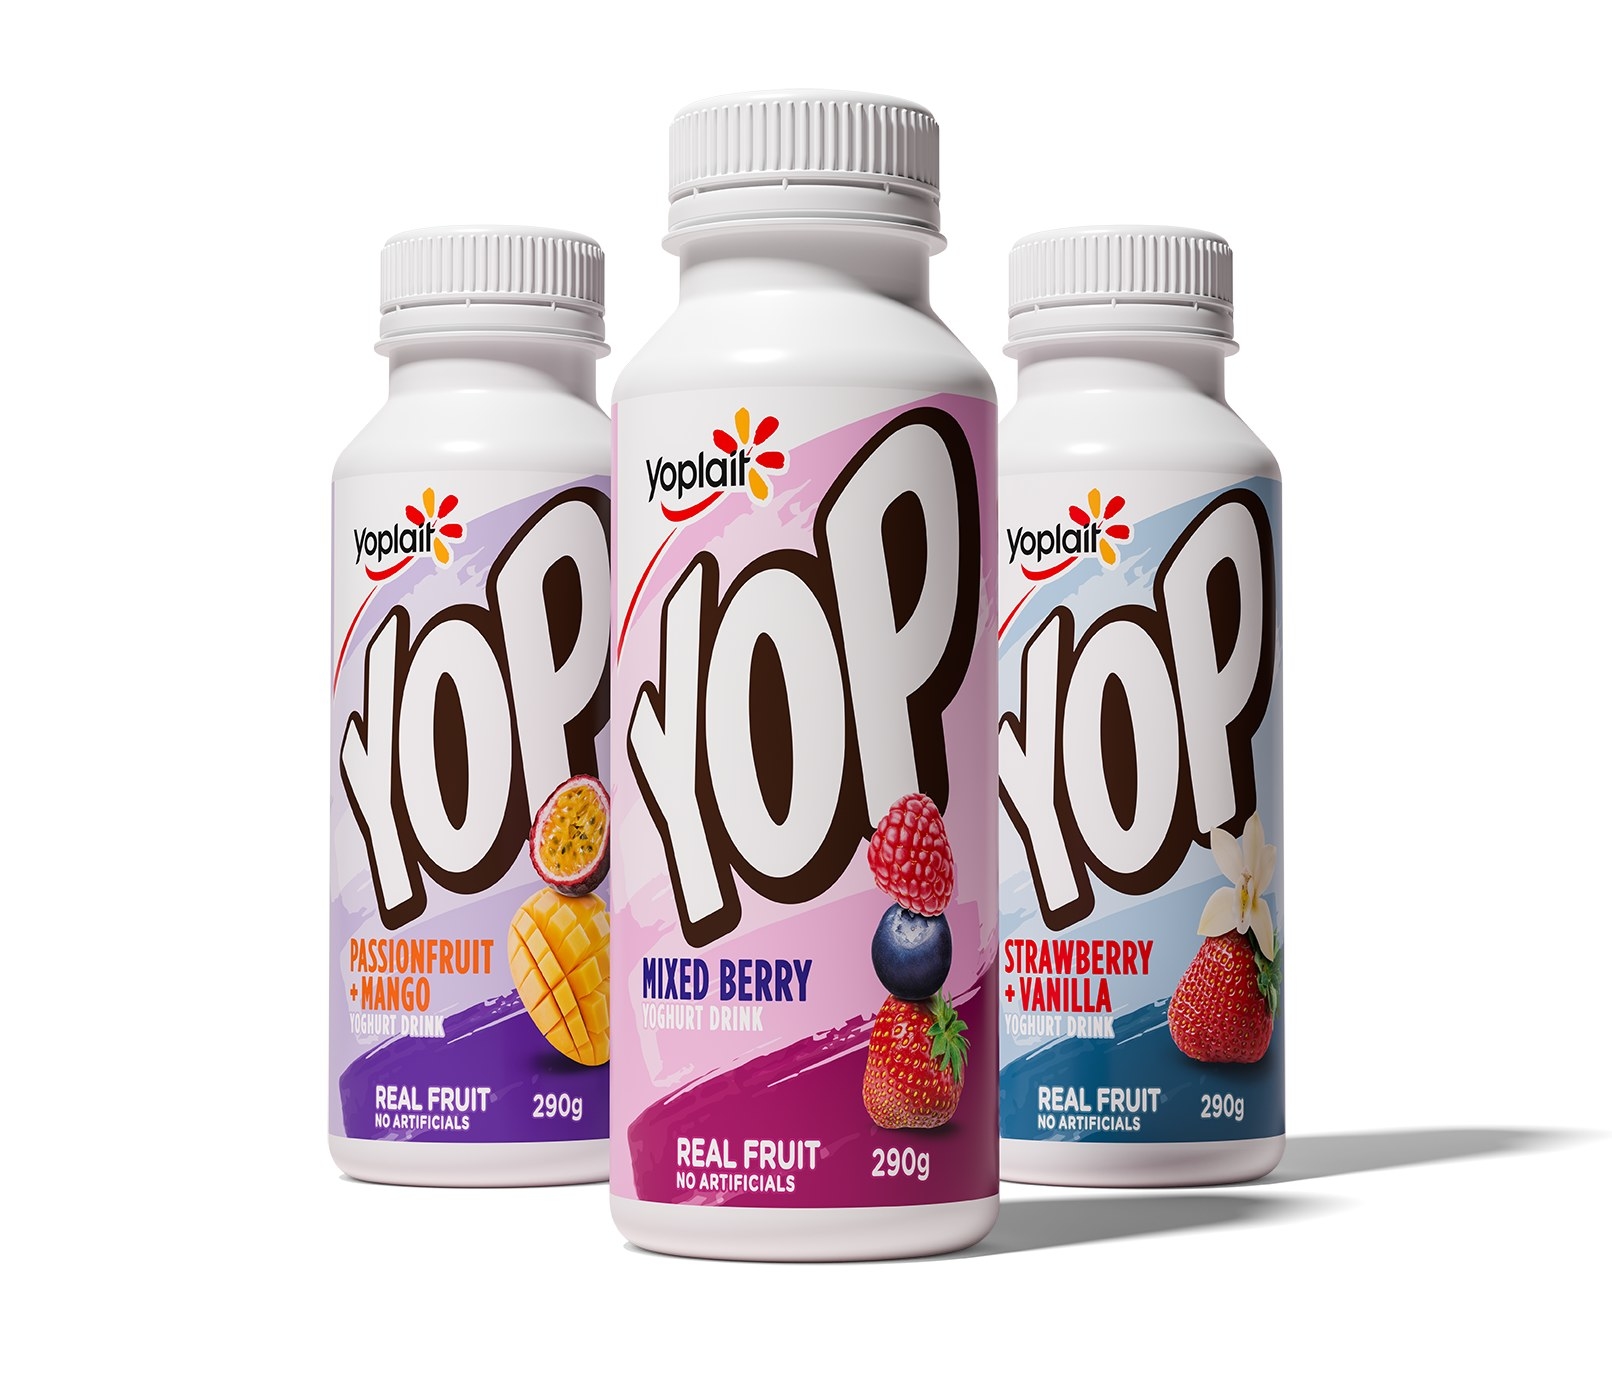 Mixed Berry, Passionfruit and Mango, and Strawberry and Vanilla Yoplait Yops